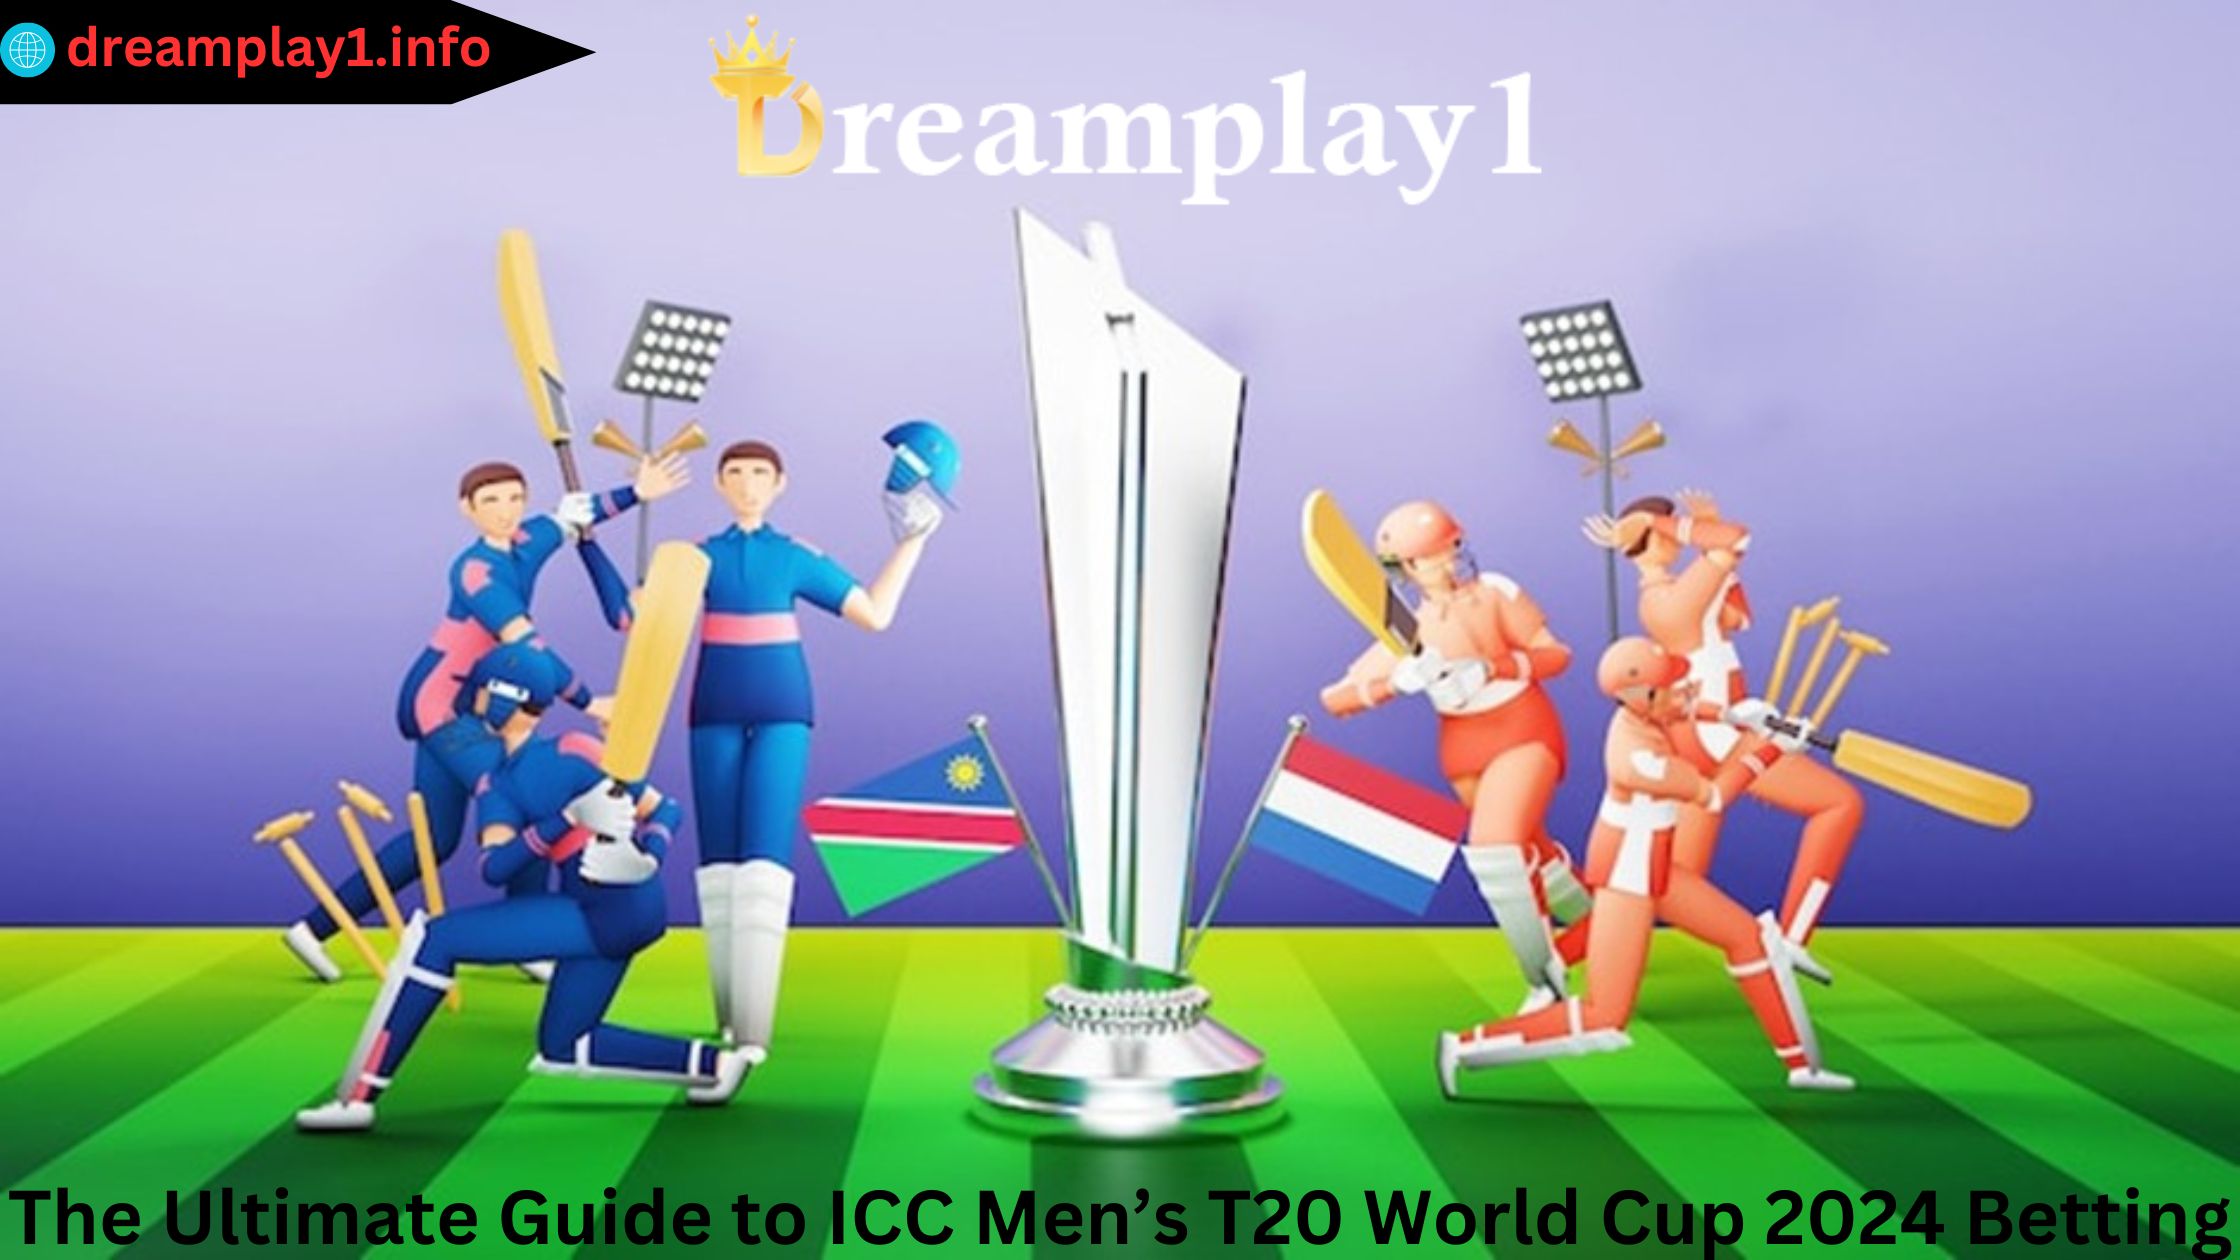 ICC Men’s T20 World Cup 2024 Betting